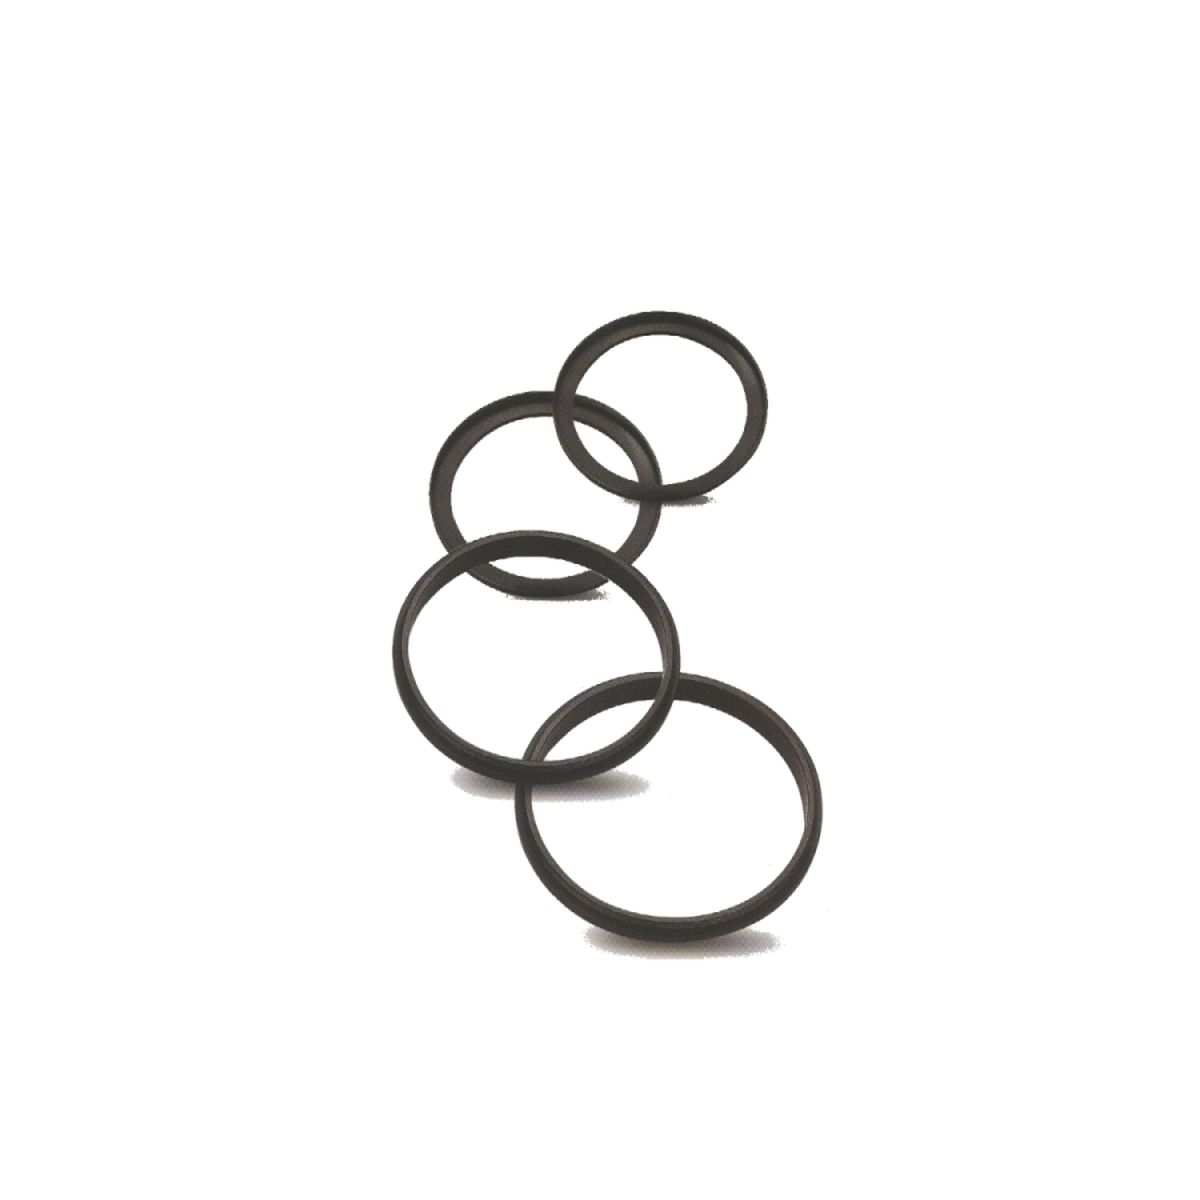 Caruba Step-up/down Ring 37mm - 39mm